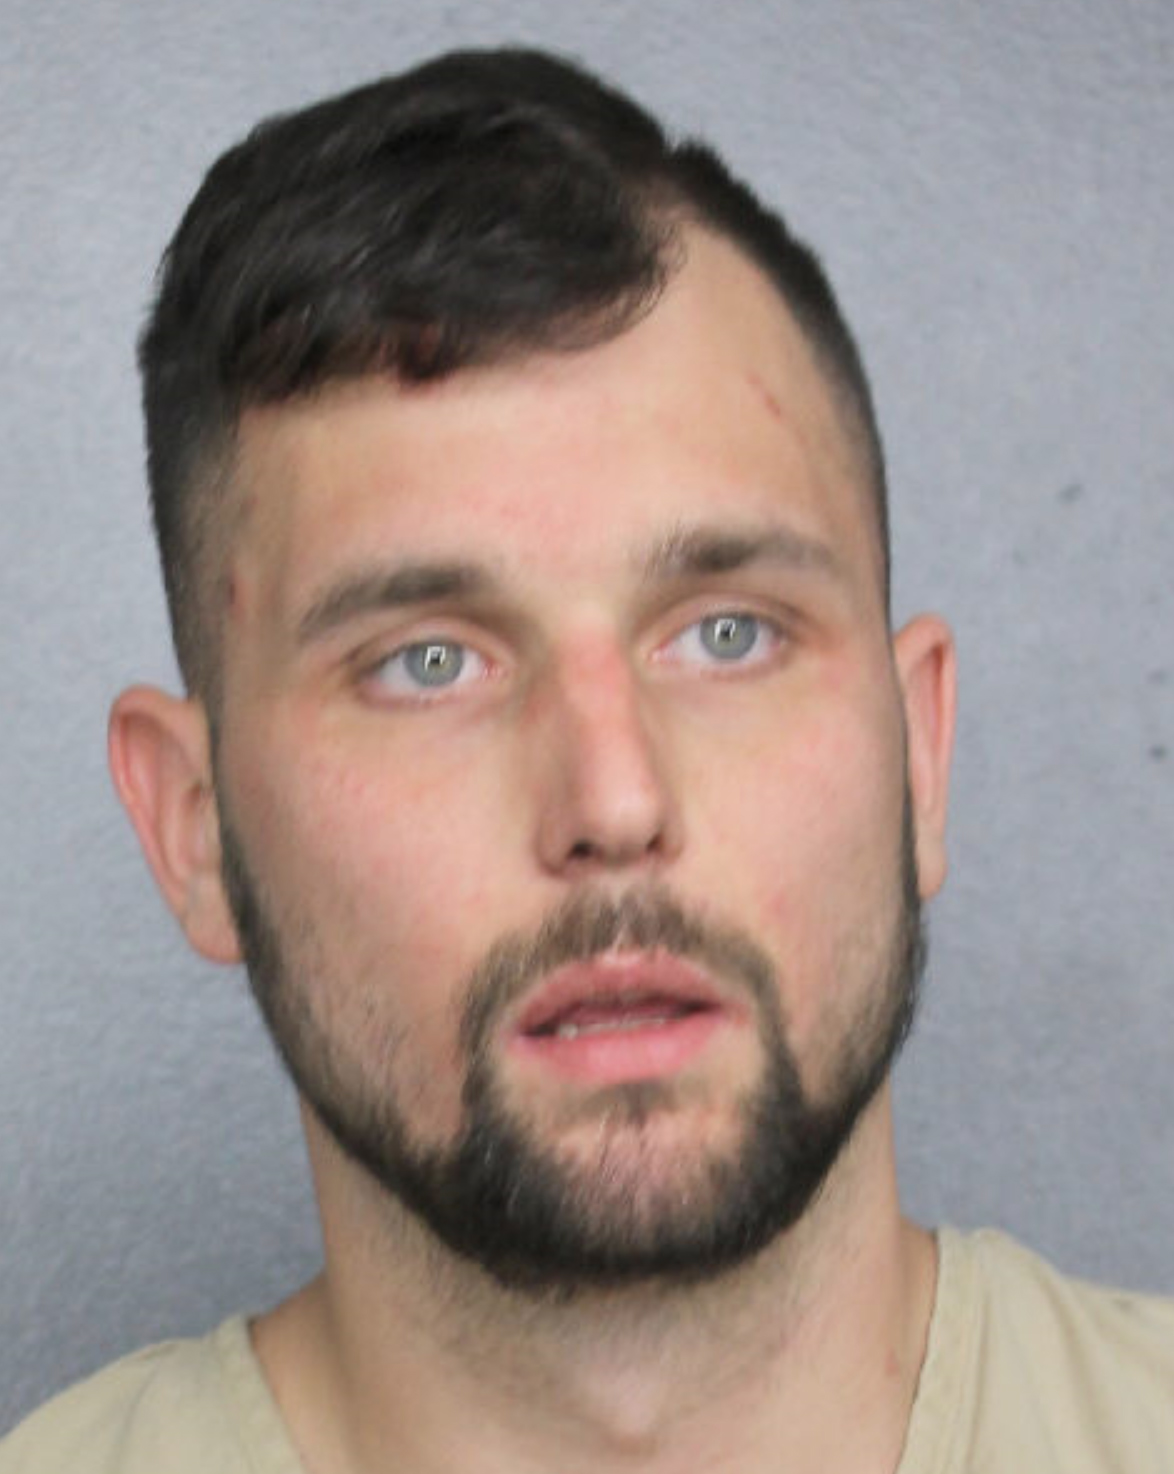 Nathan Couture Coral Springs Man Tased and Arrested For Grand Theft Auto